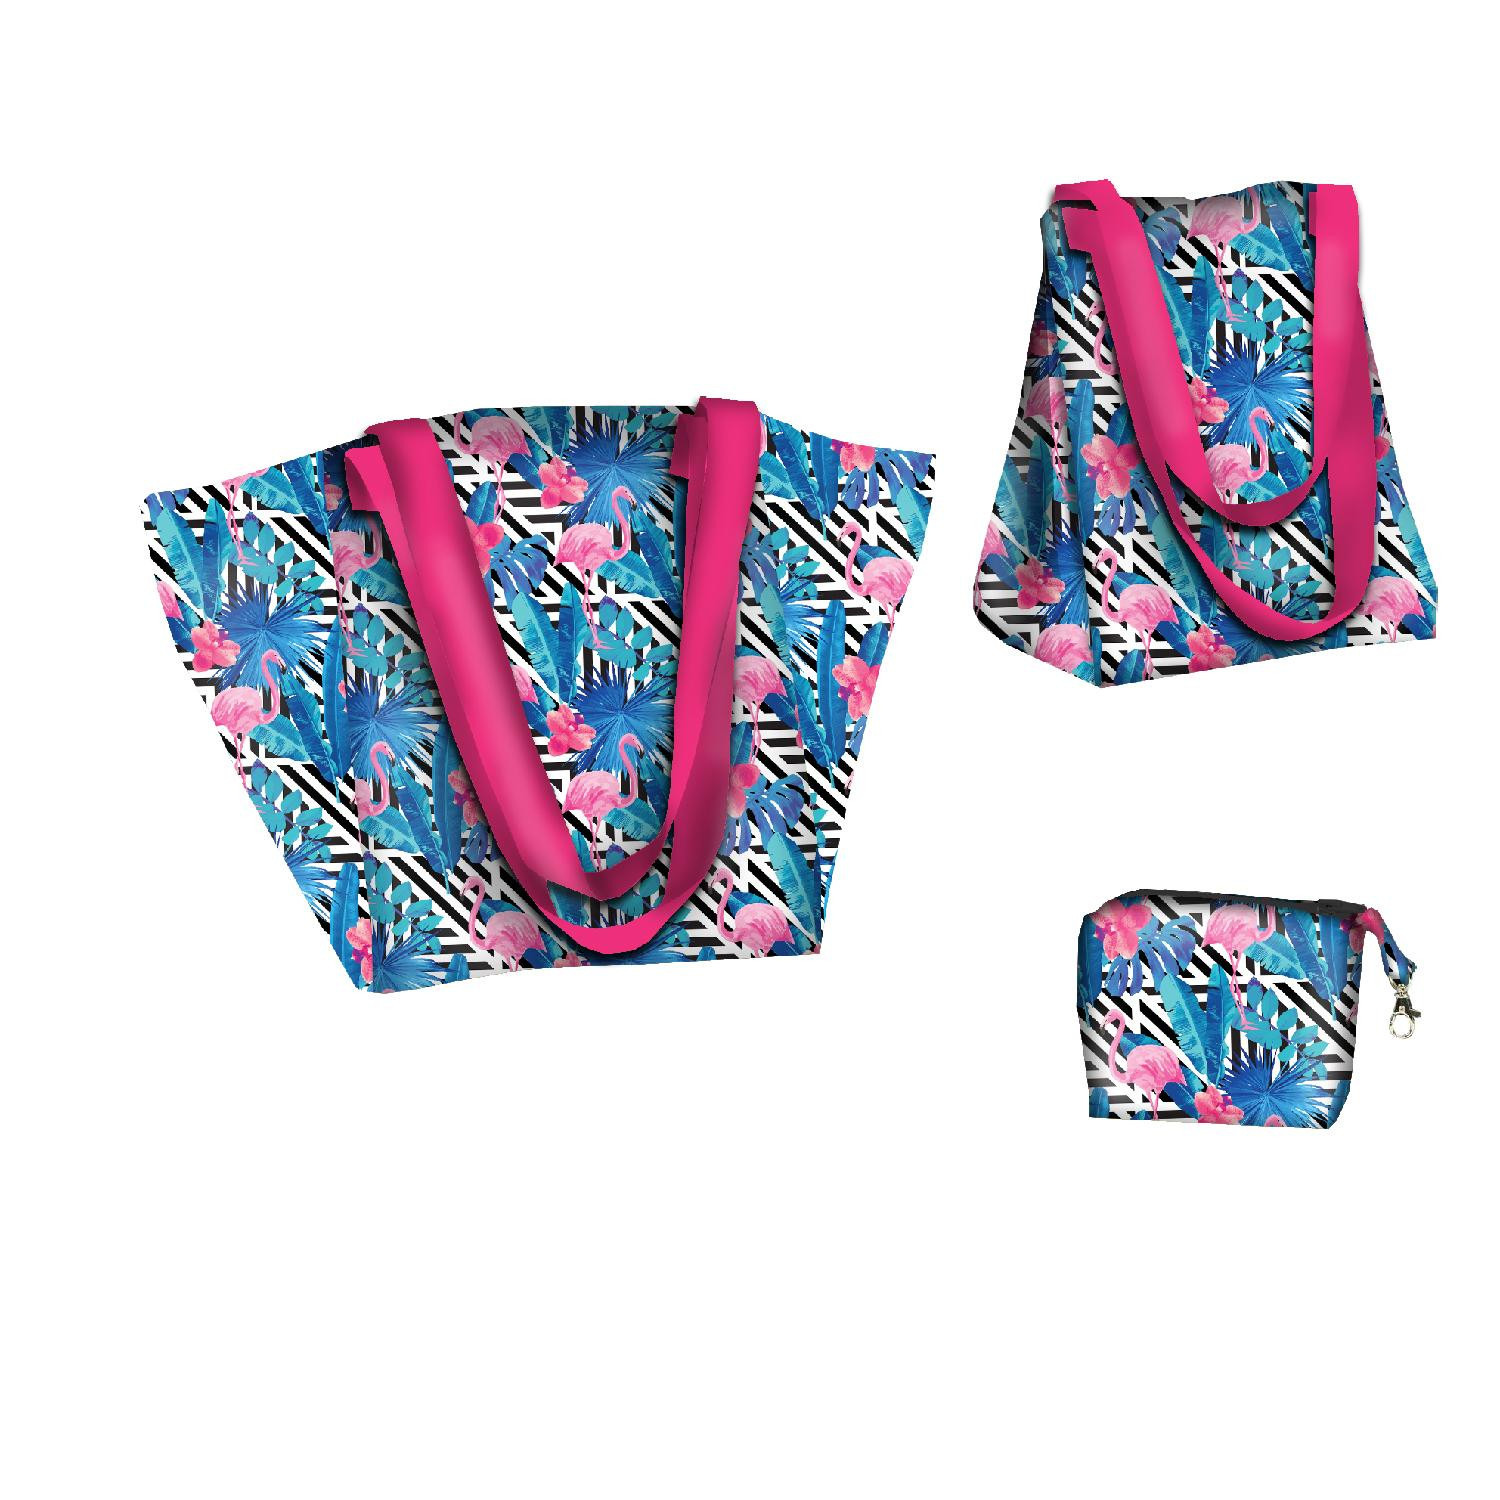 XL bag with in-bag pouch 2 in 1 - TROPICAL FLAMINGOS - sewing set